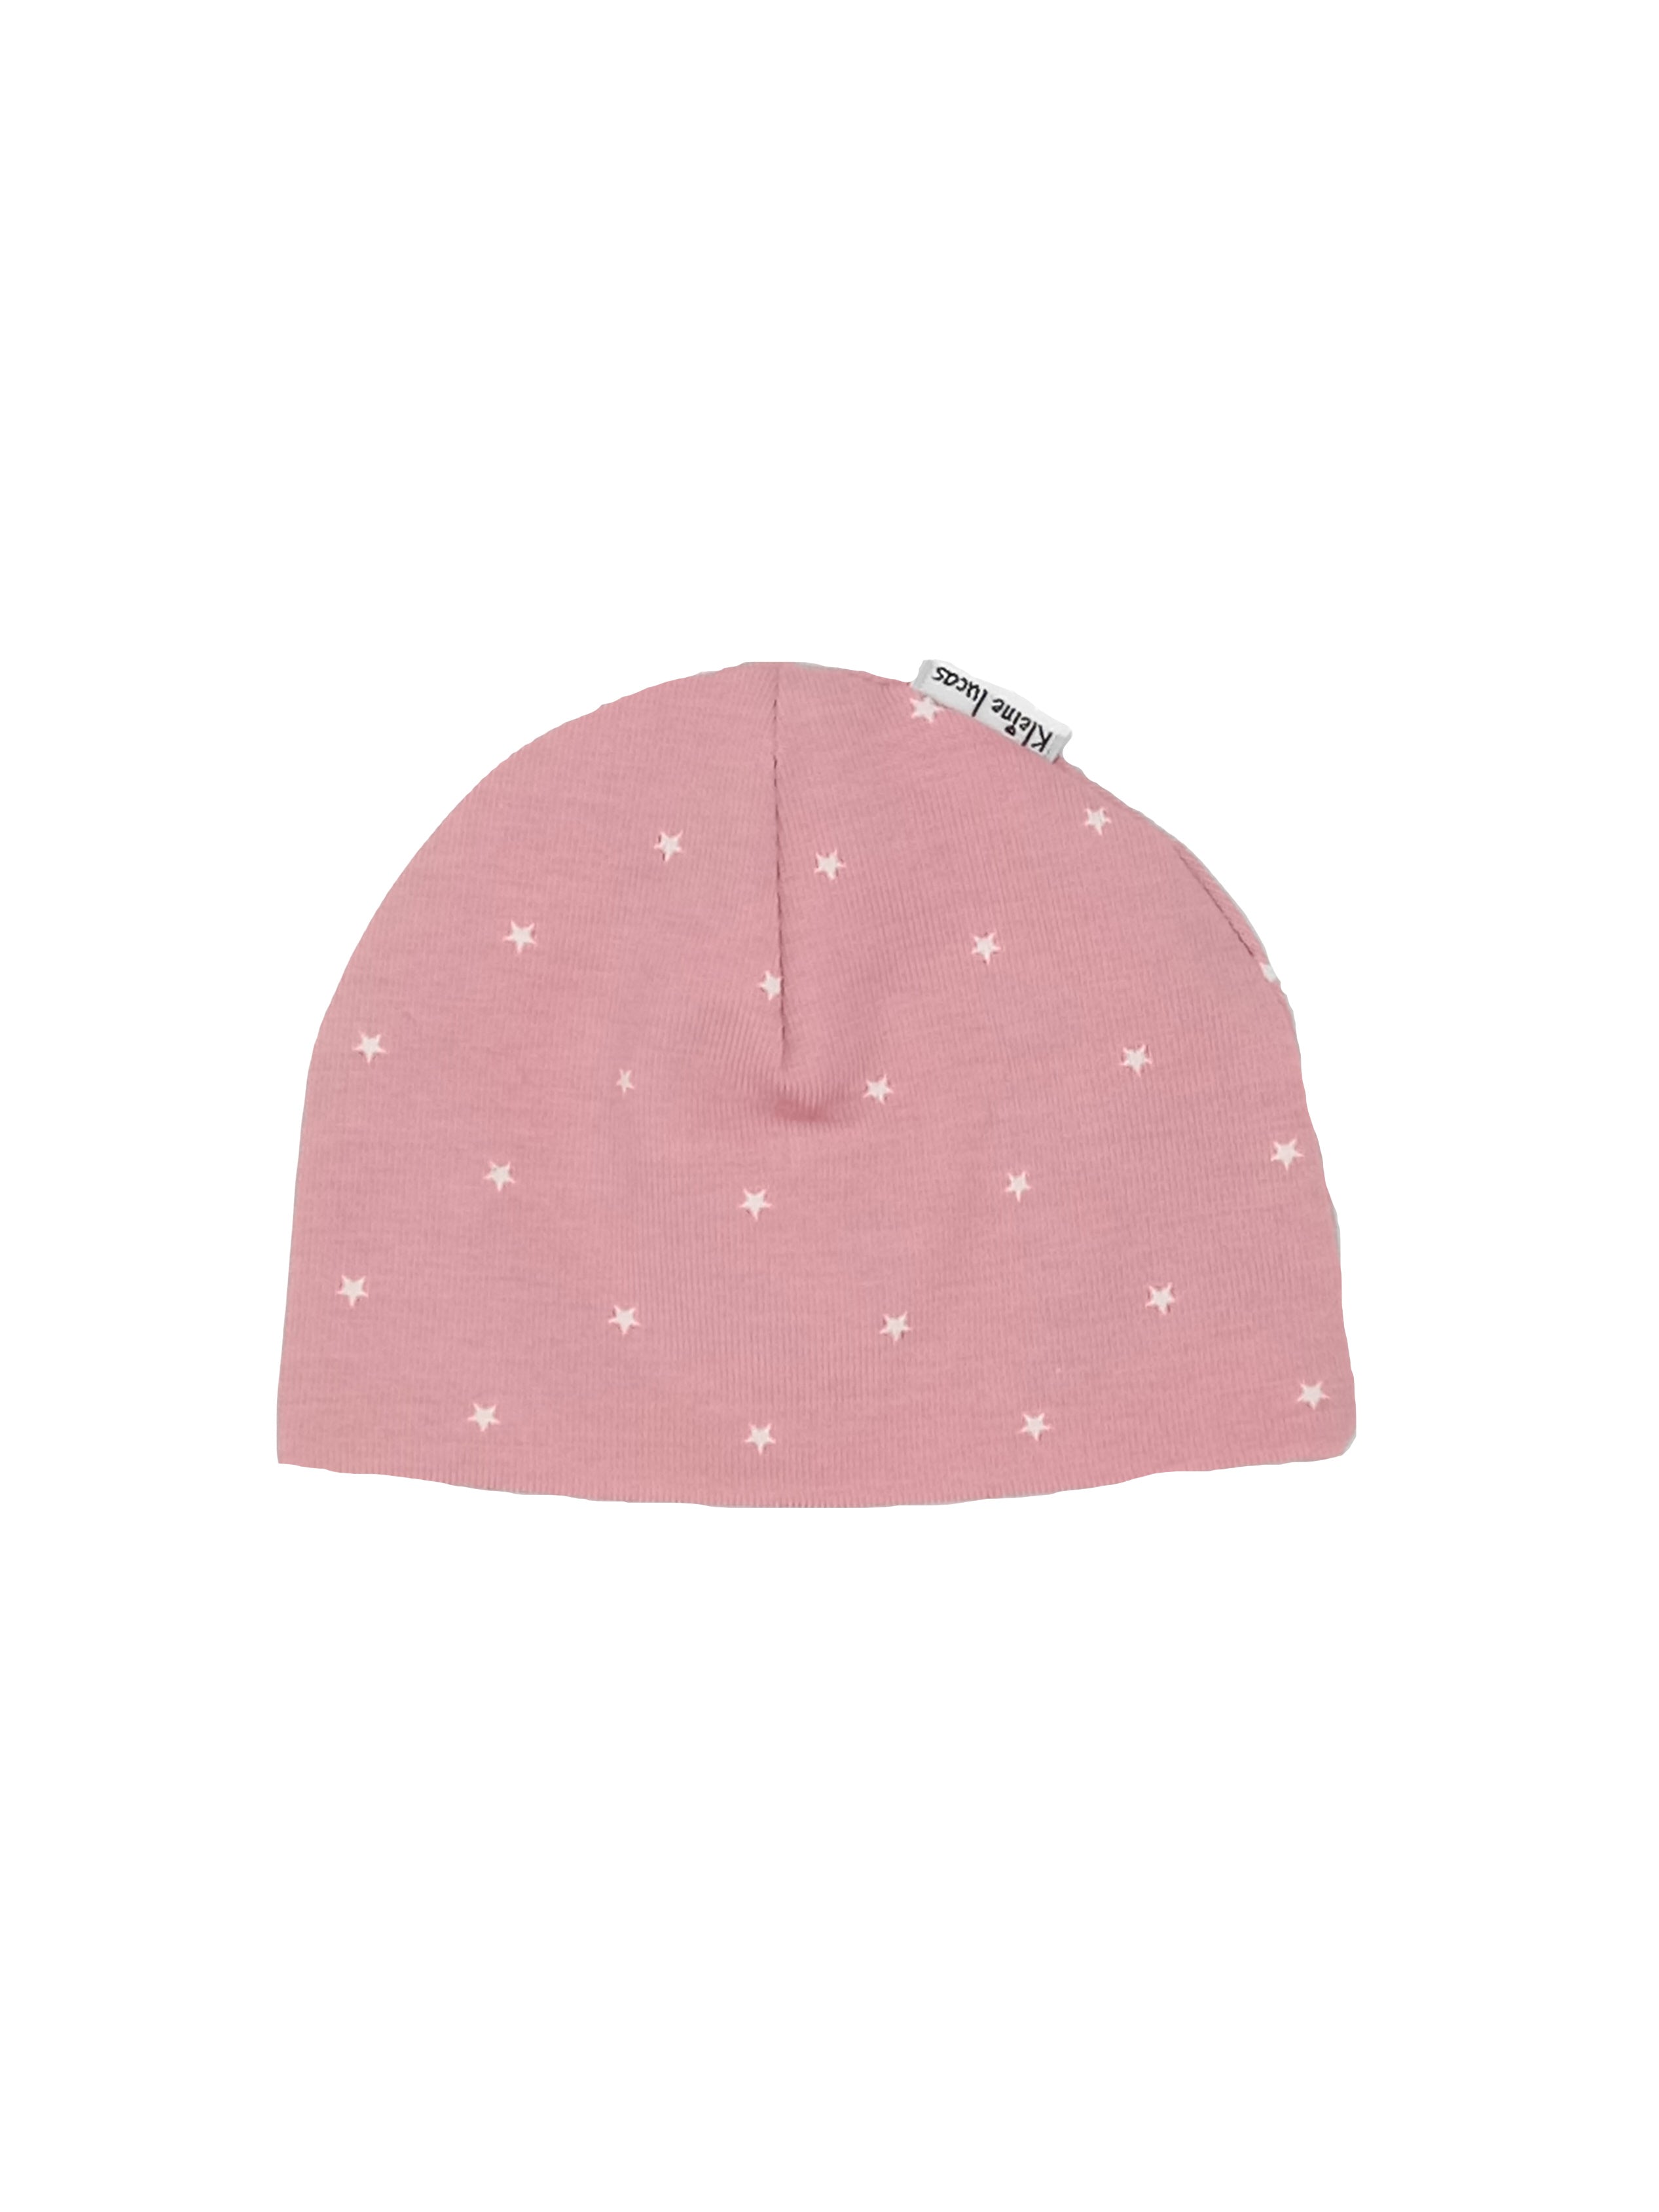 Pink with White Stars Hat Hat Little Lucas 